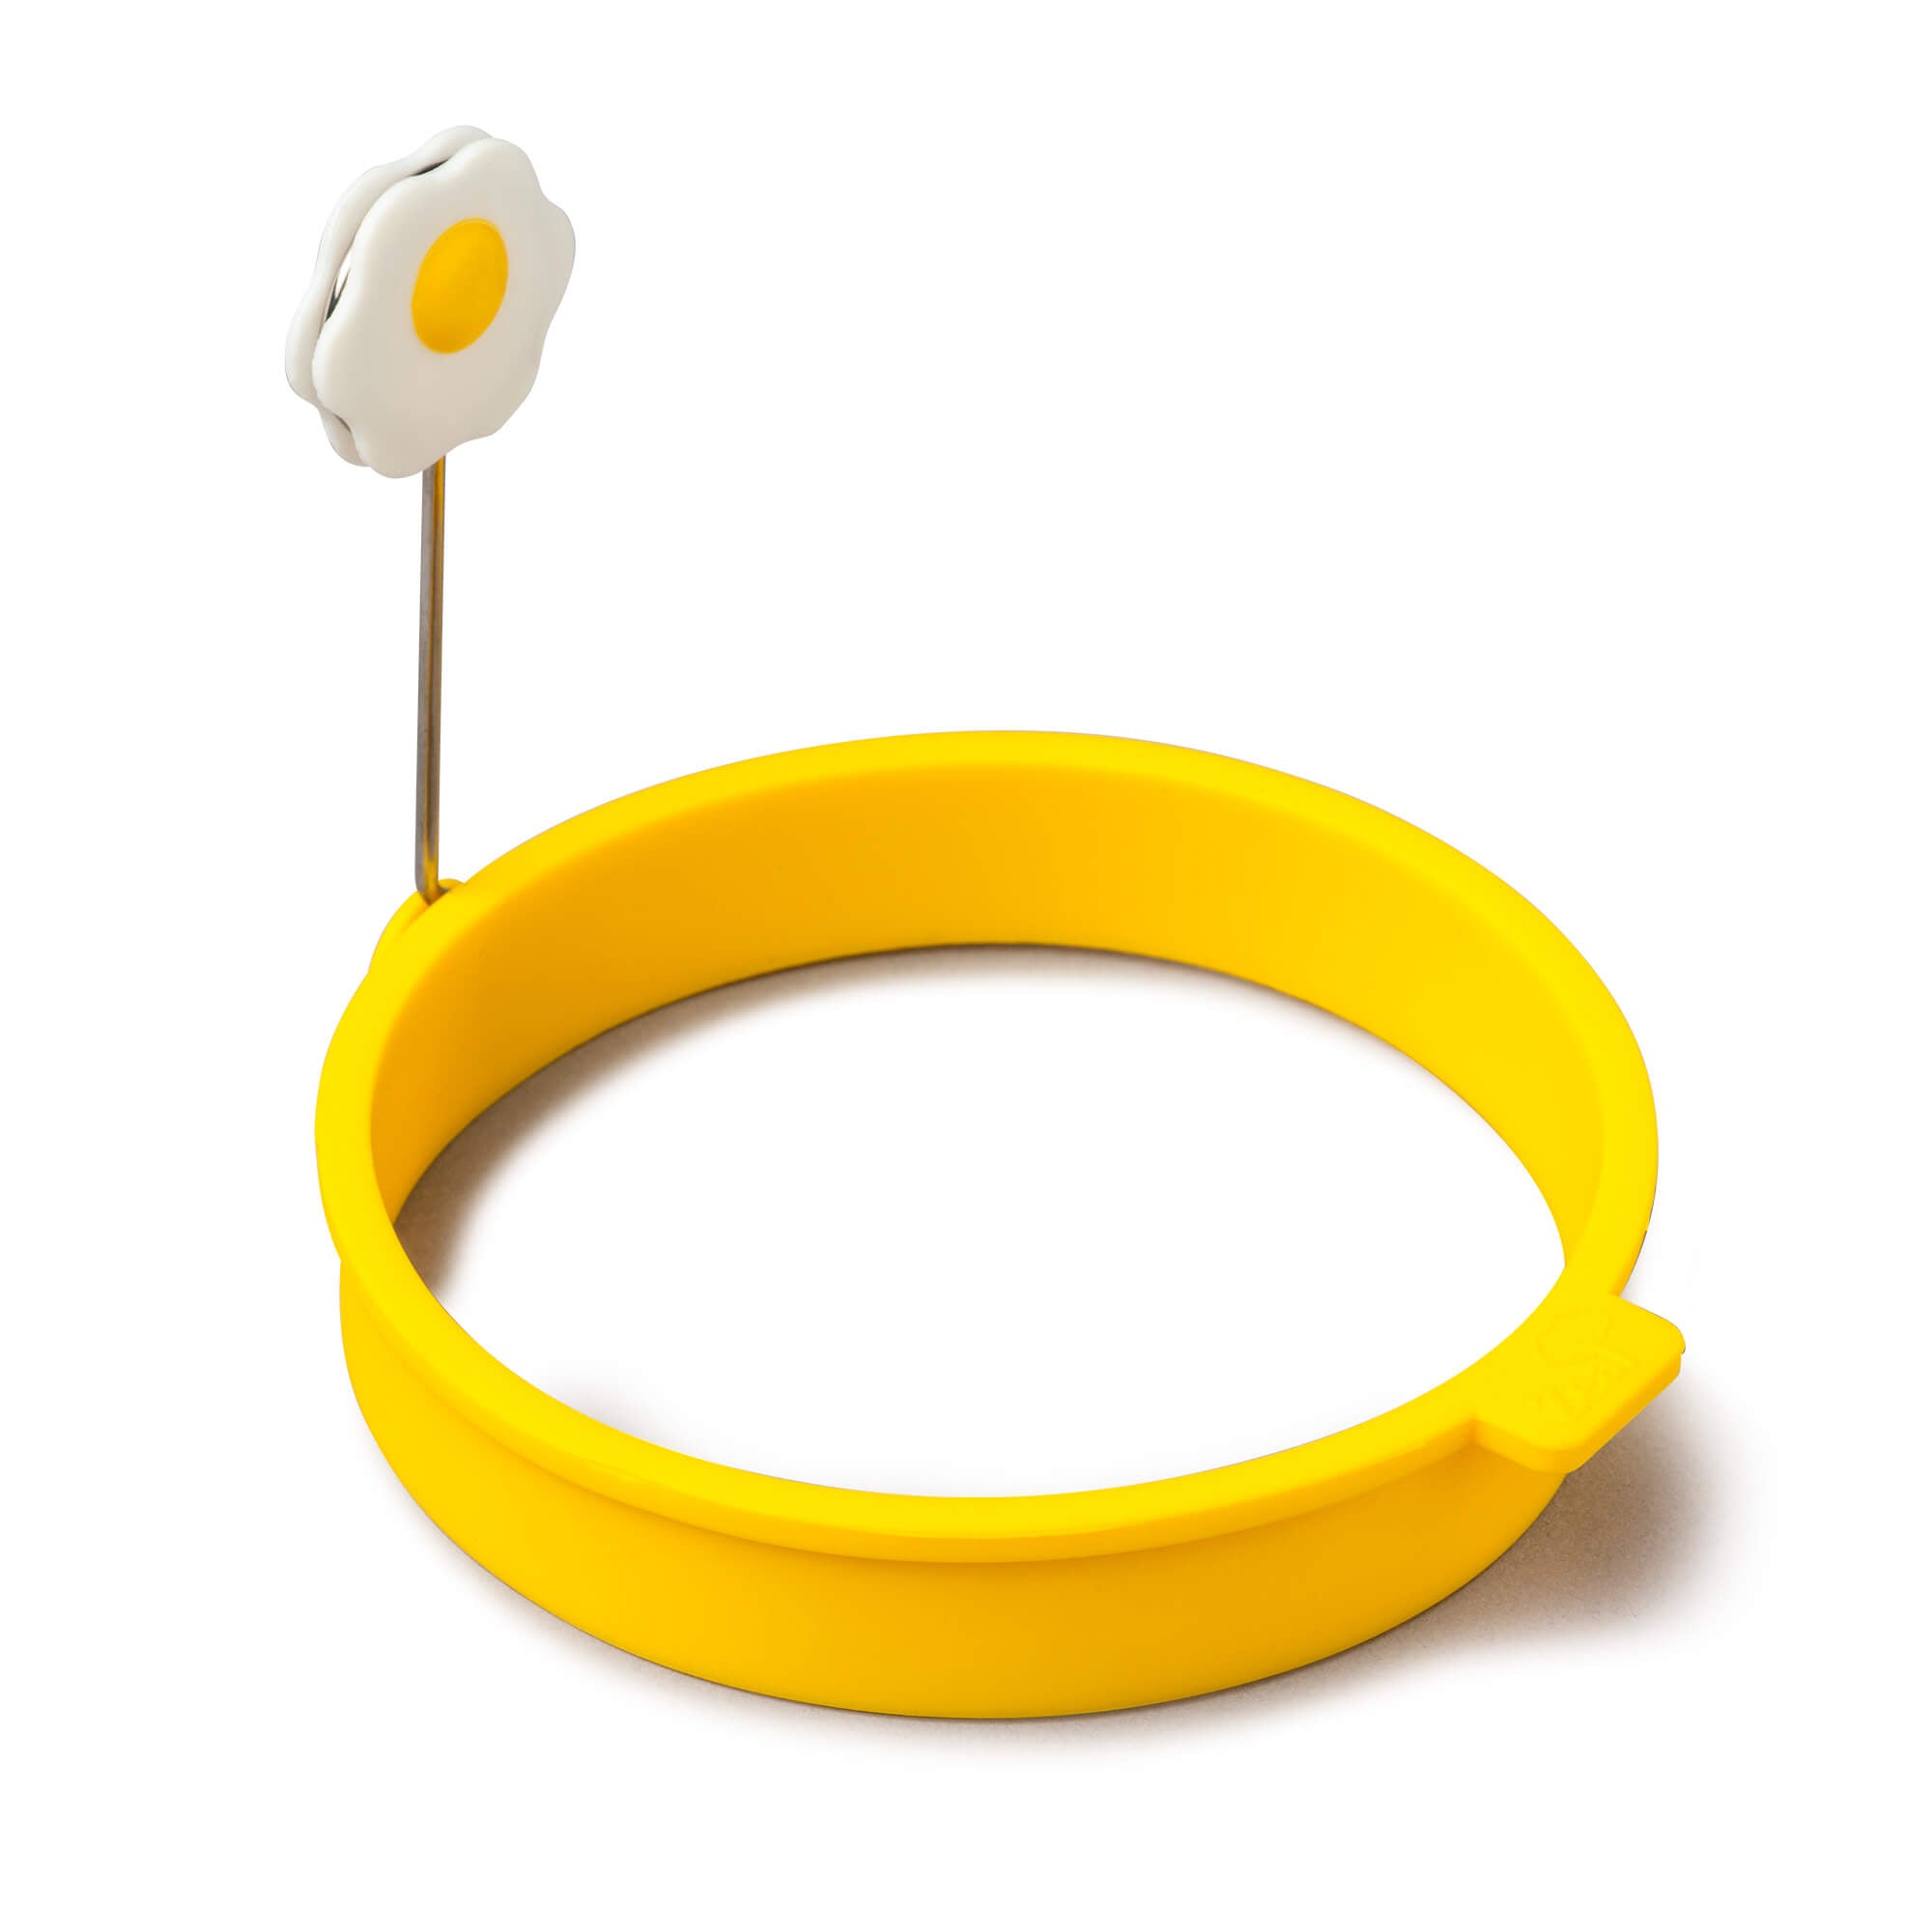 Zeal Silicone Egg Ring in yellow